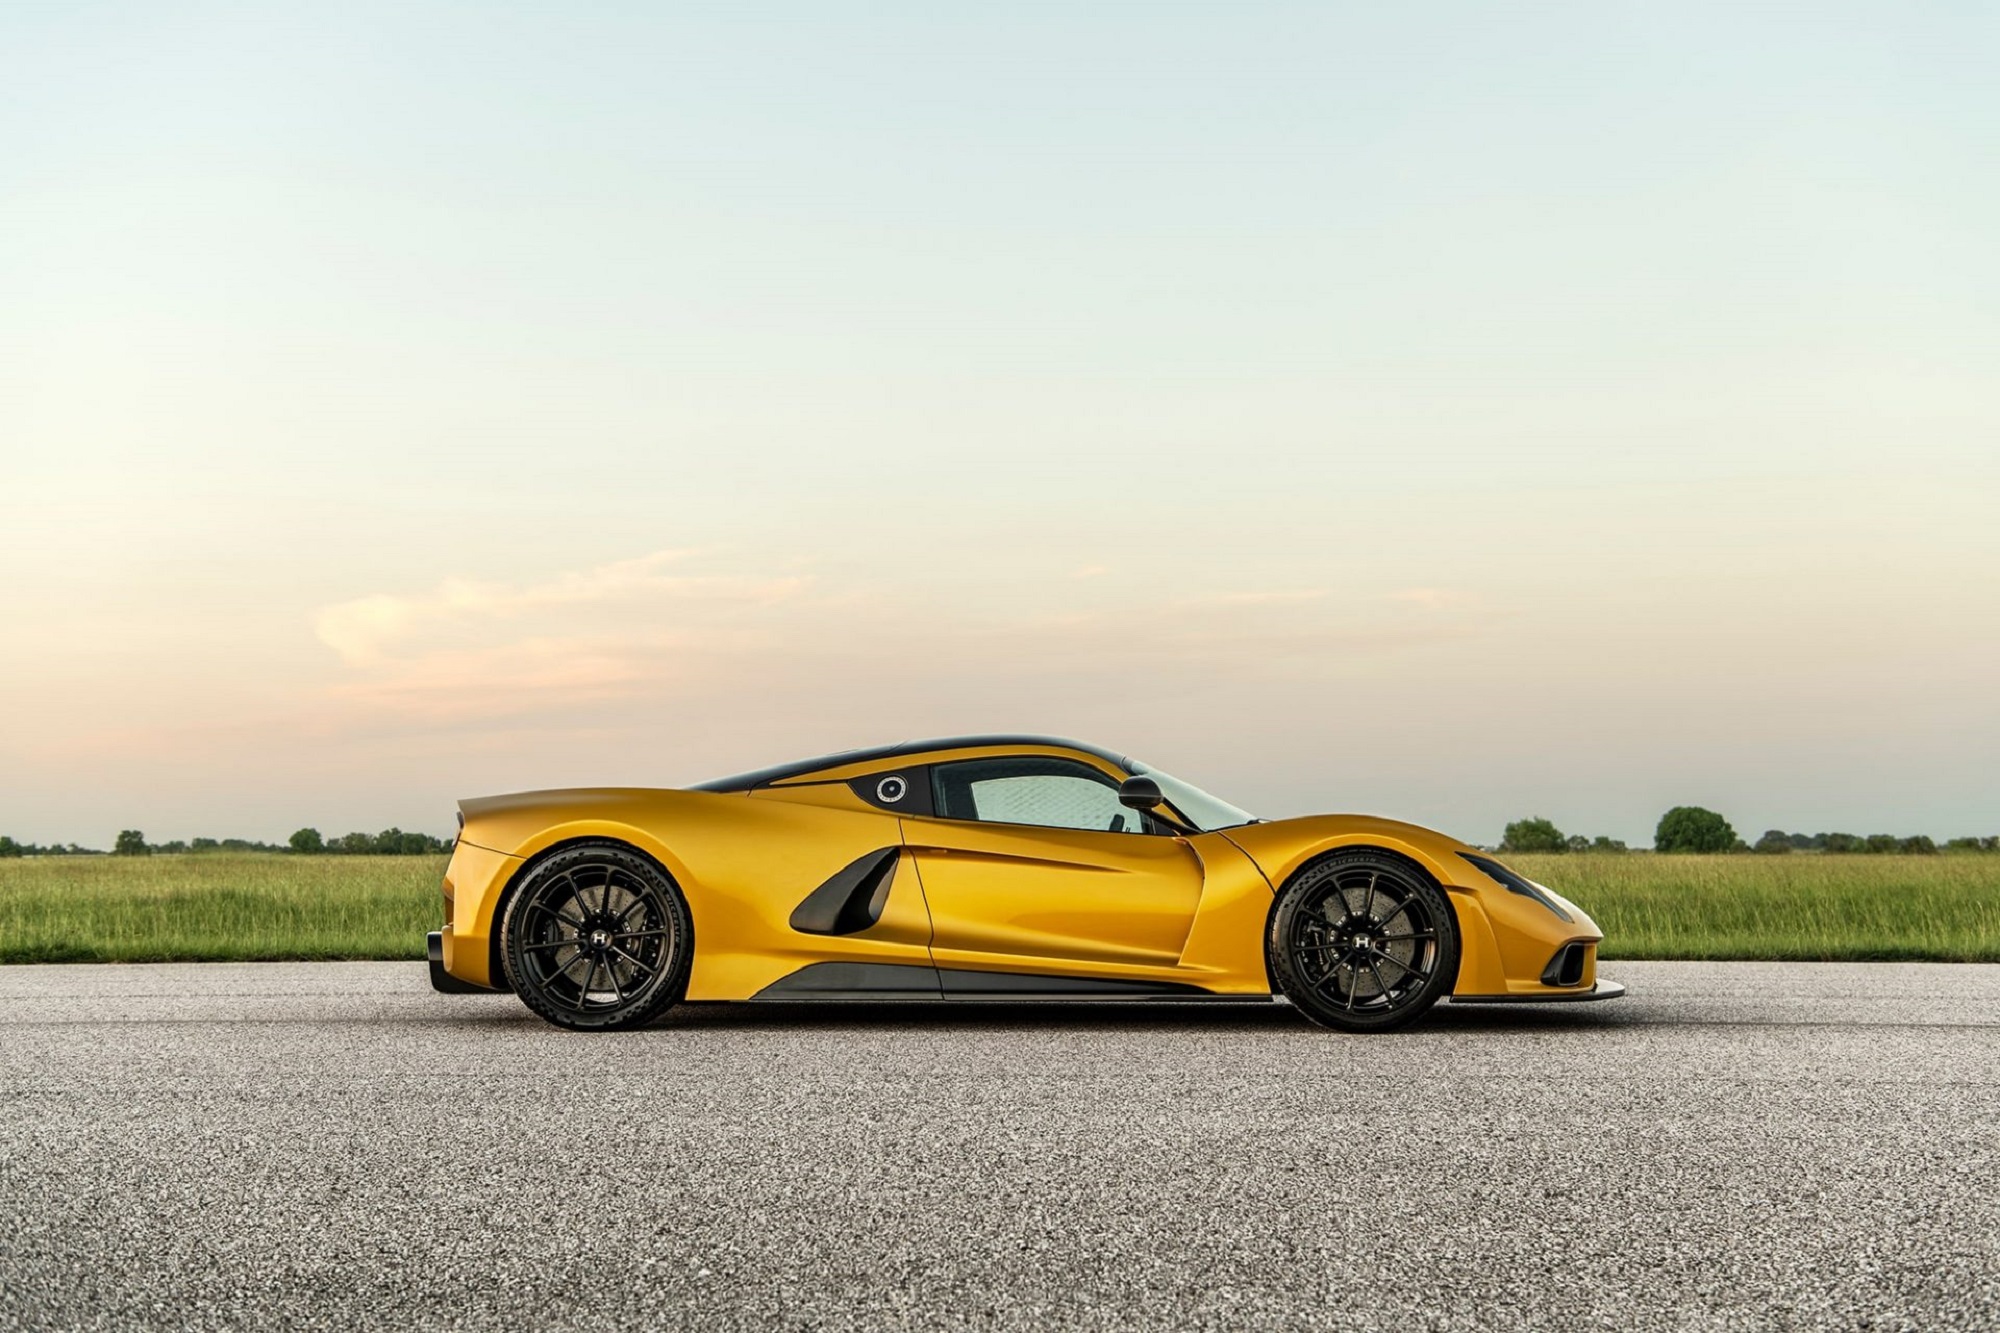 The Hennessey Venom F5, one of the fastest cars in the world, is headed to Goodwood.